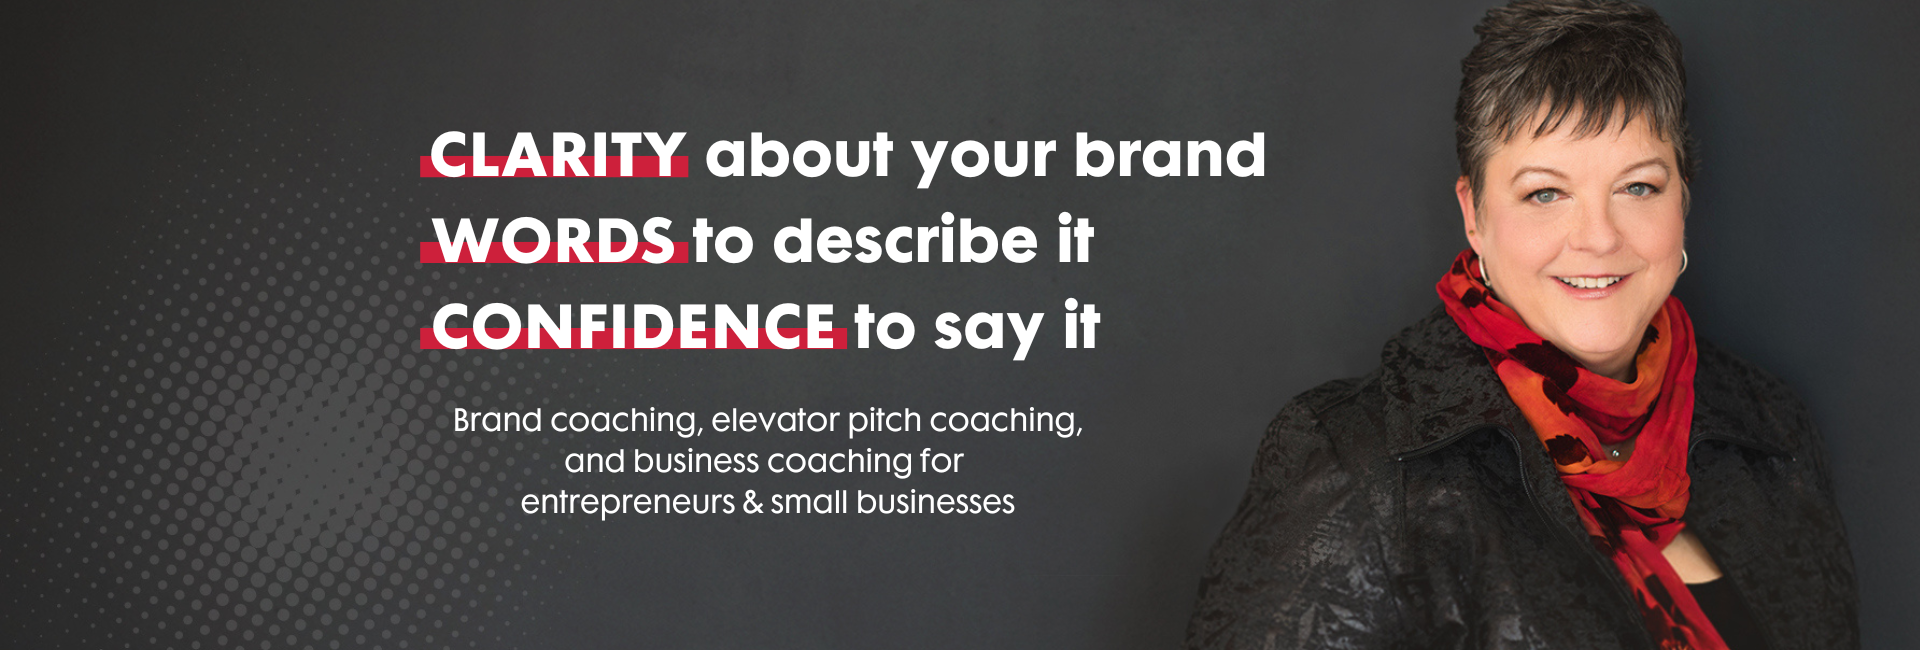 Branding coach, elevator pitch coaching, business coachhing for entrepreneurs and small businesses